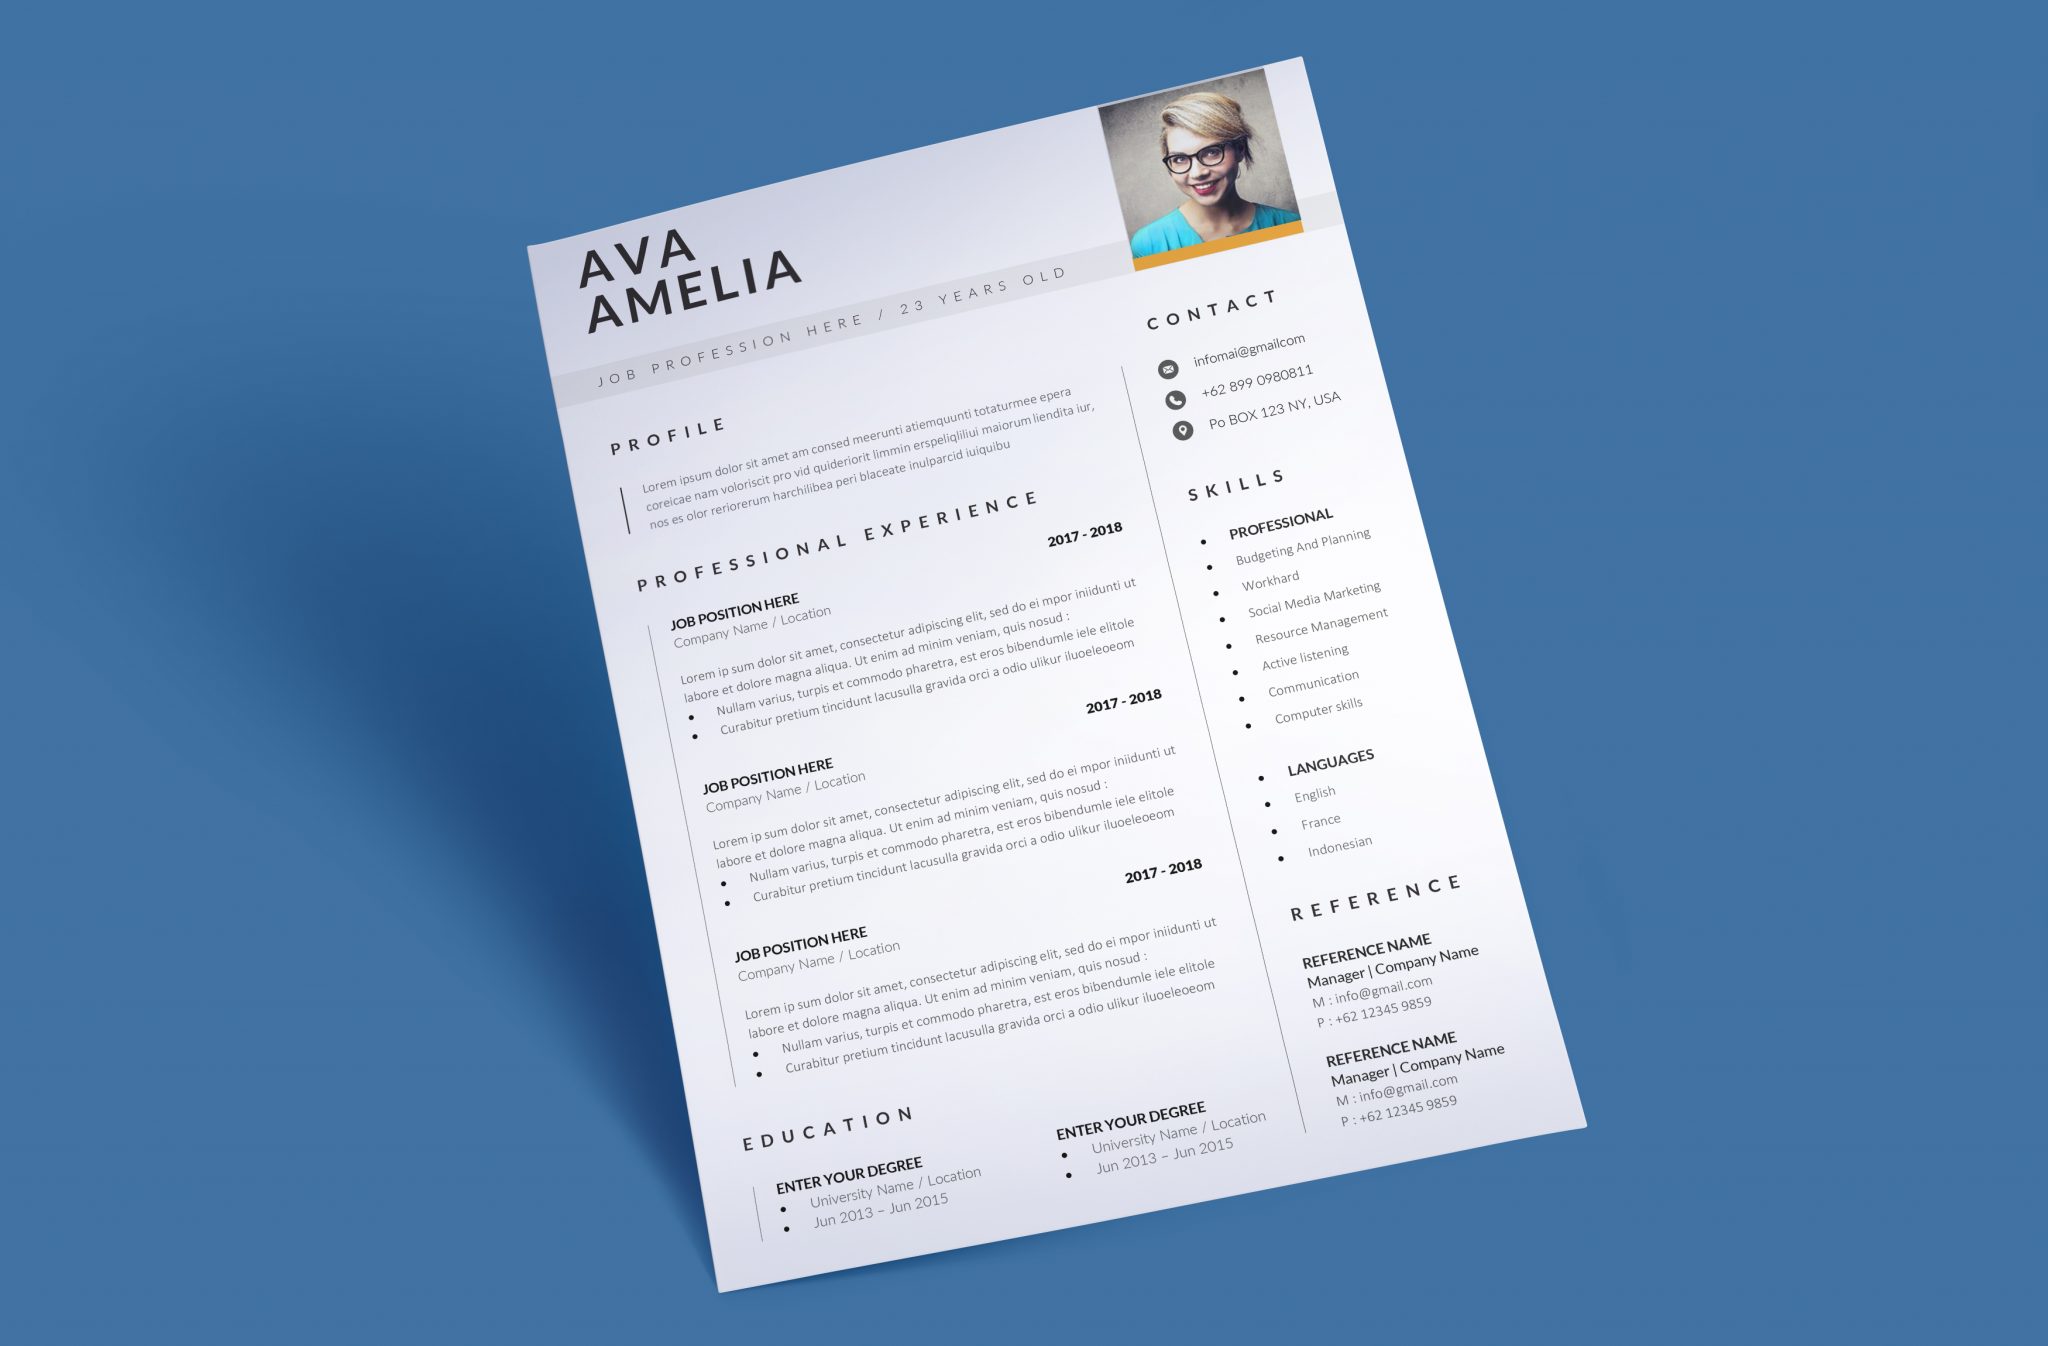 download a free ats friendly resume template from the web